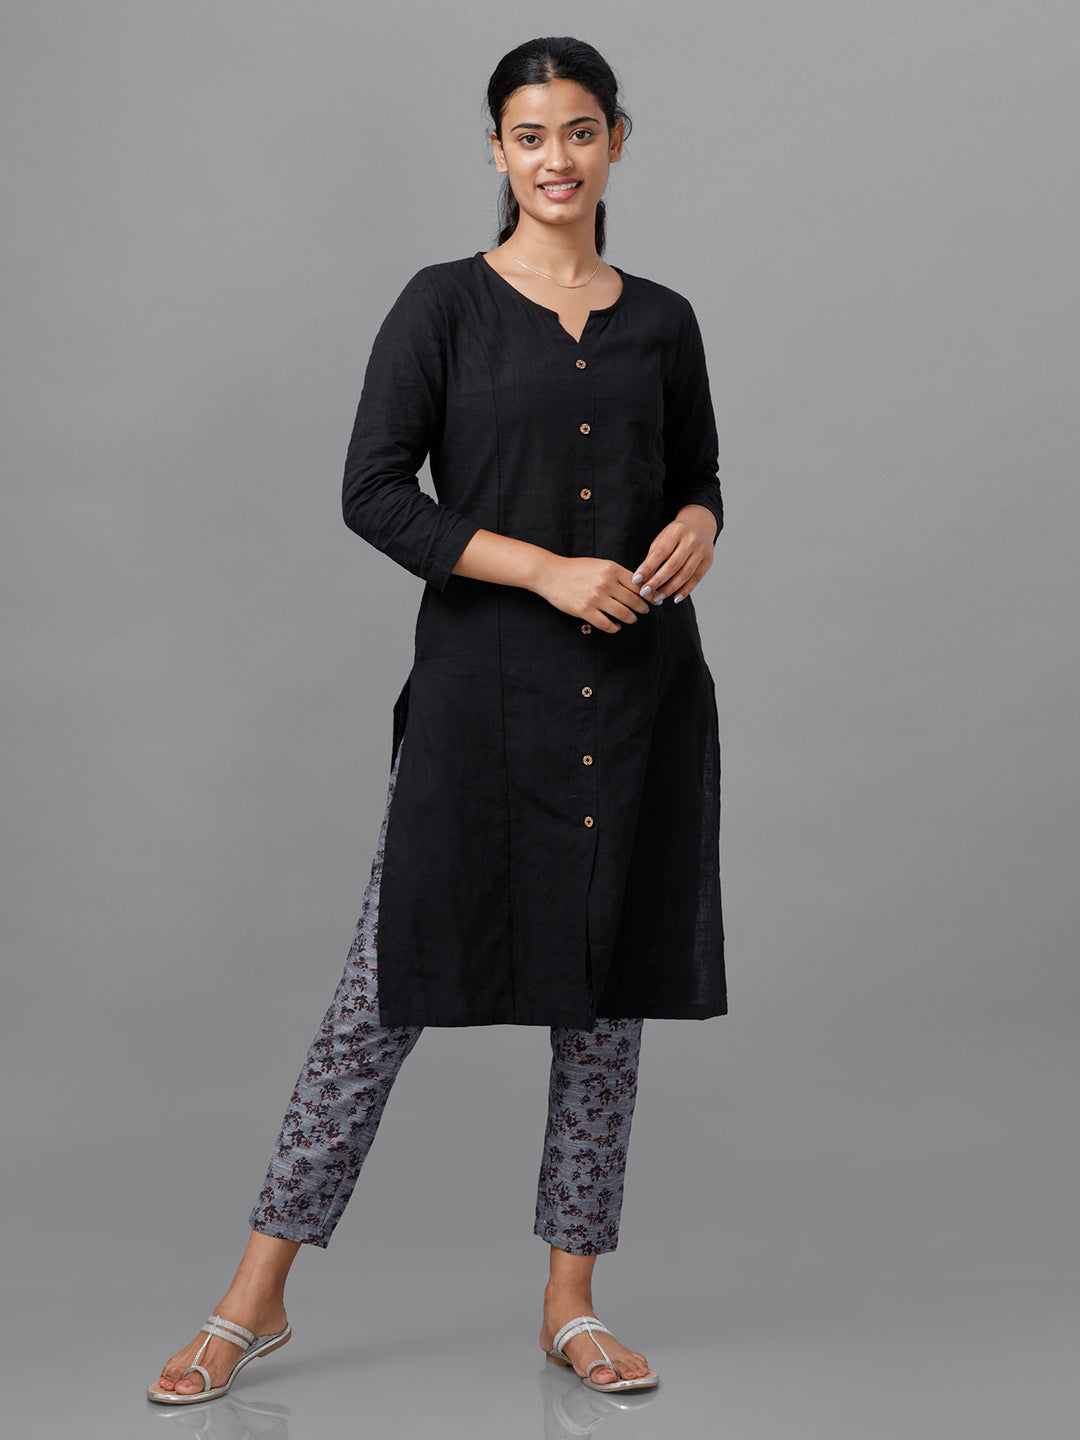 Bollywood Trouser Suits Online - Shopping for Designer Bollywood Trousers @  AndaaFashion.com